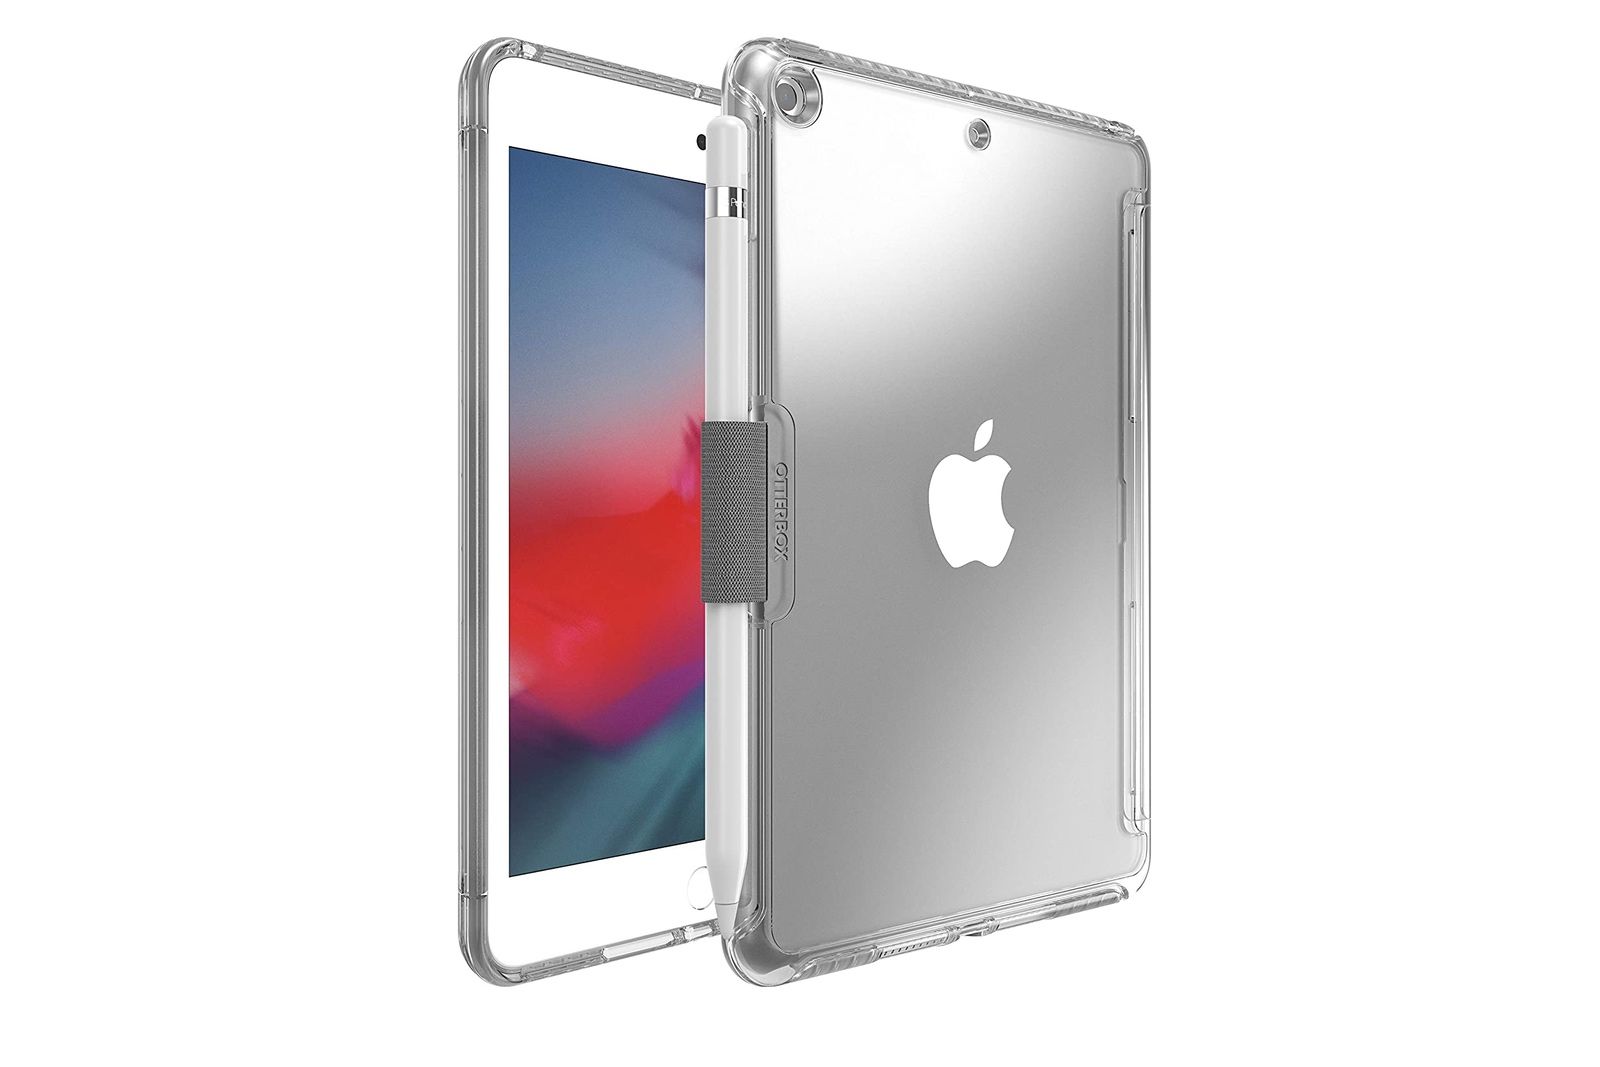 Best Ipad Mini Cases Protect Your 7 9 Inch Apple Tablet image 1